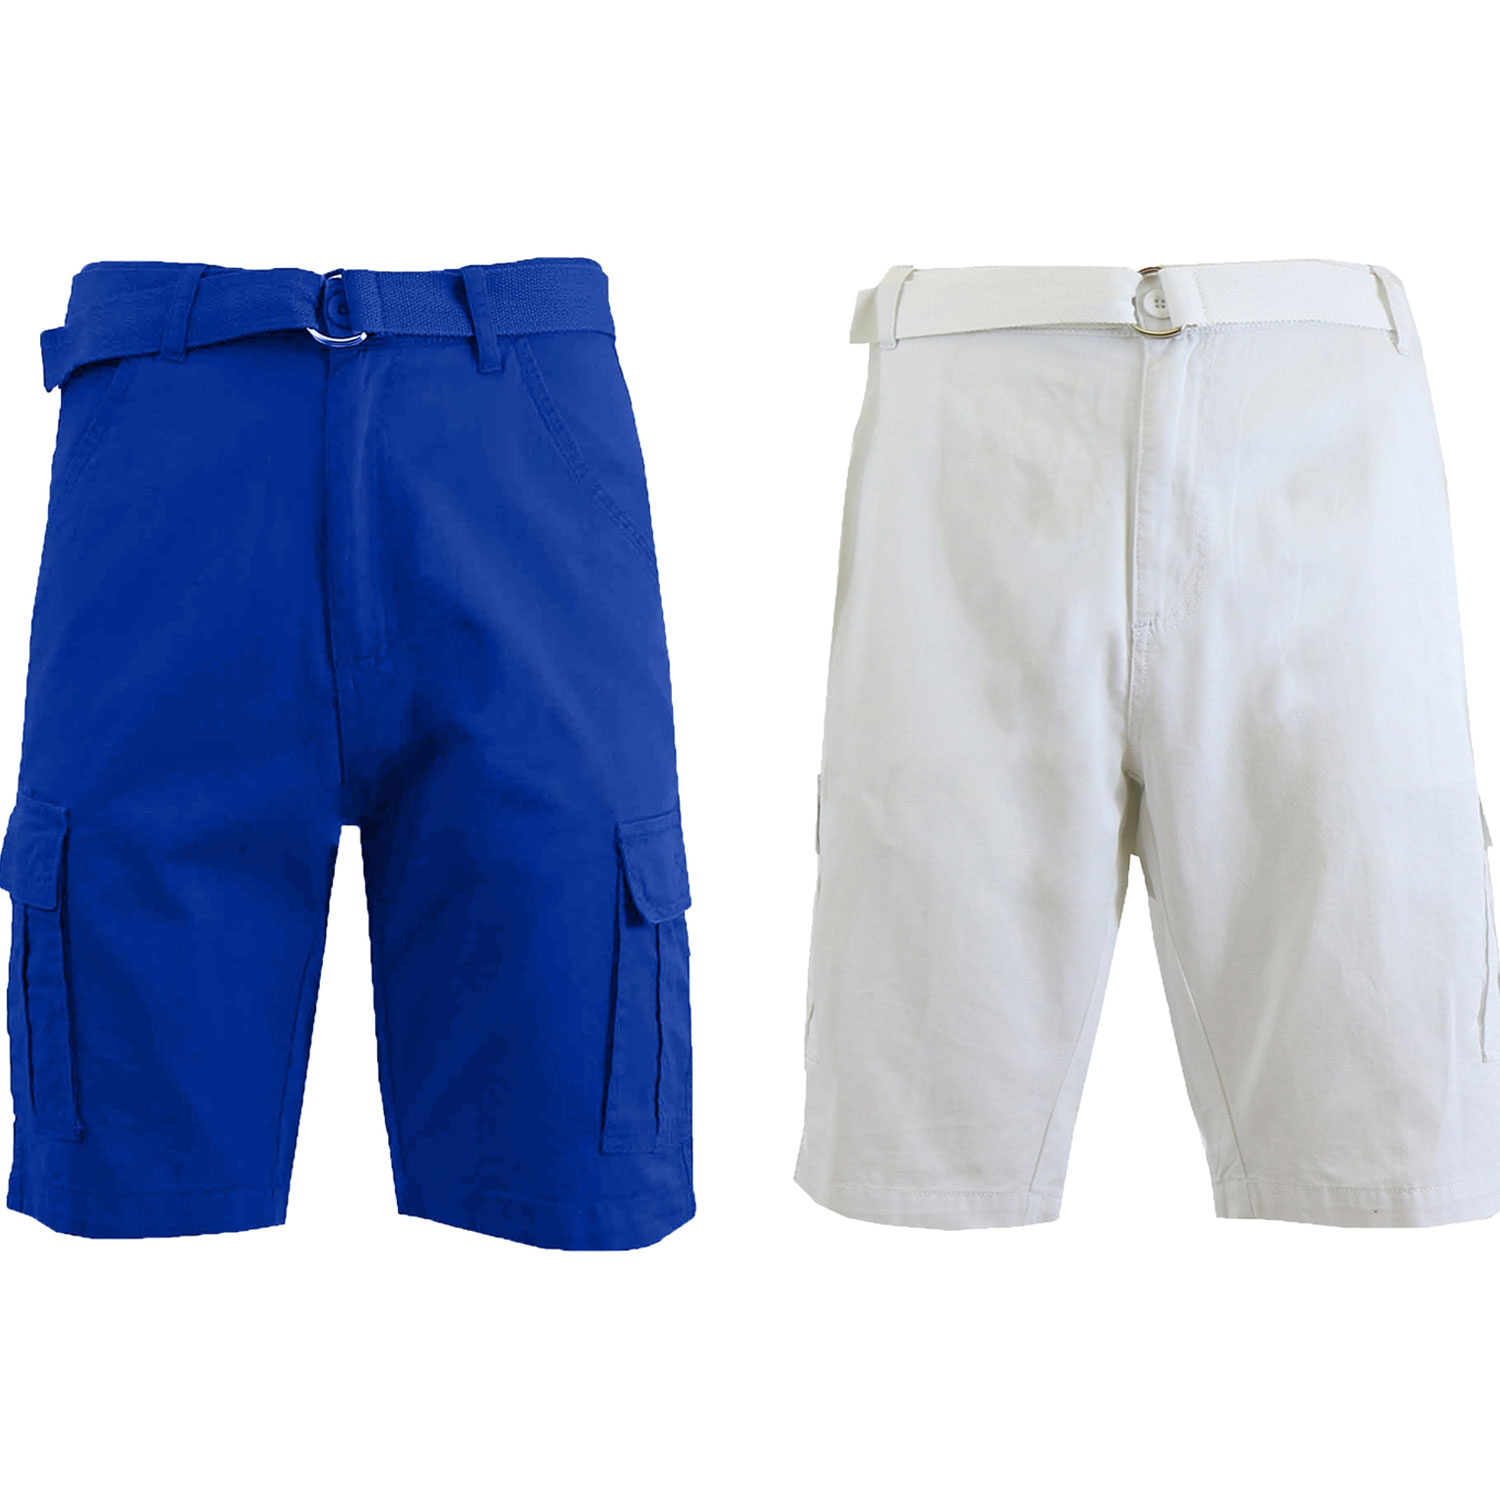 2 Pack Men's Cotton Chino Shorts With Belt